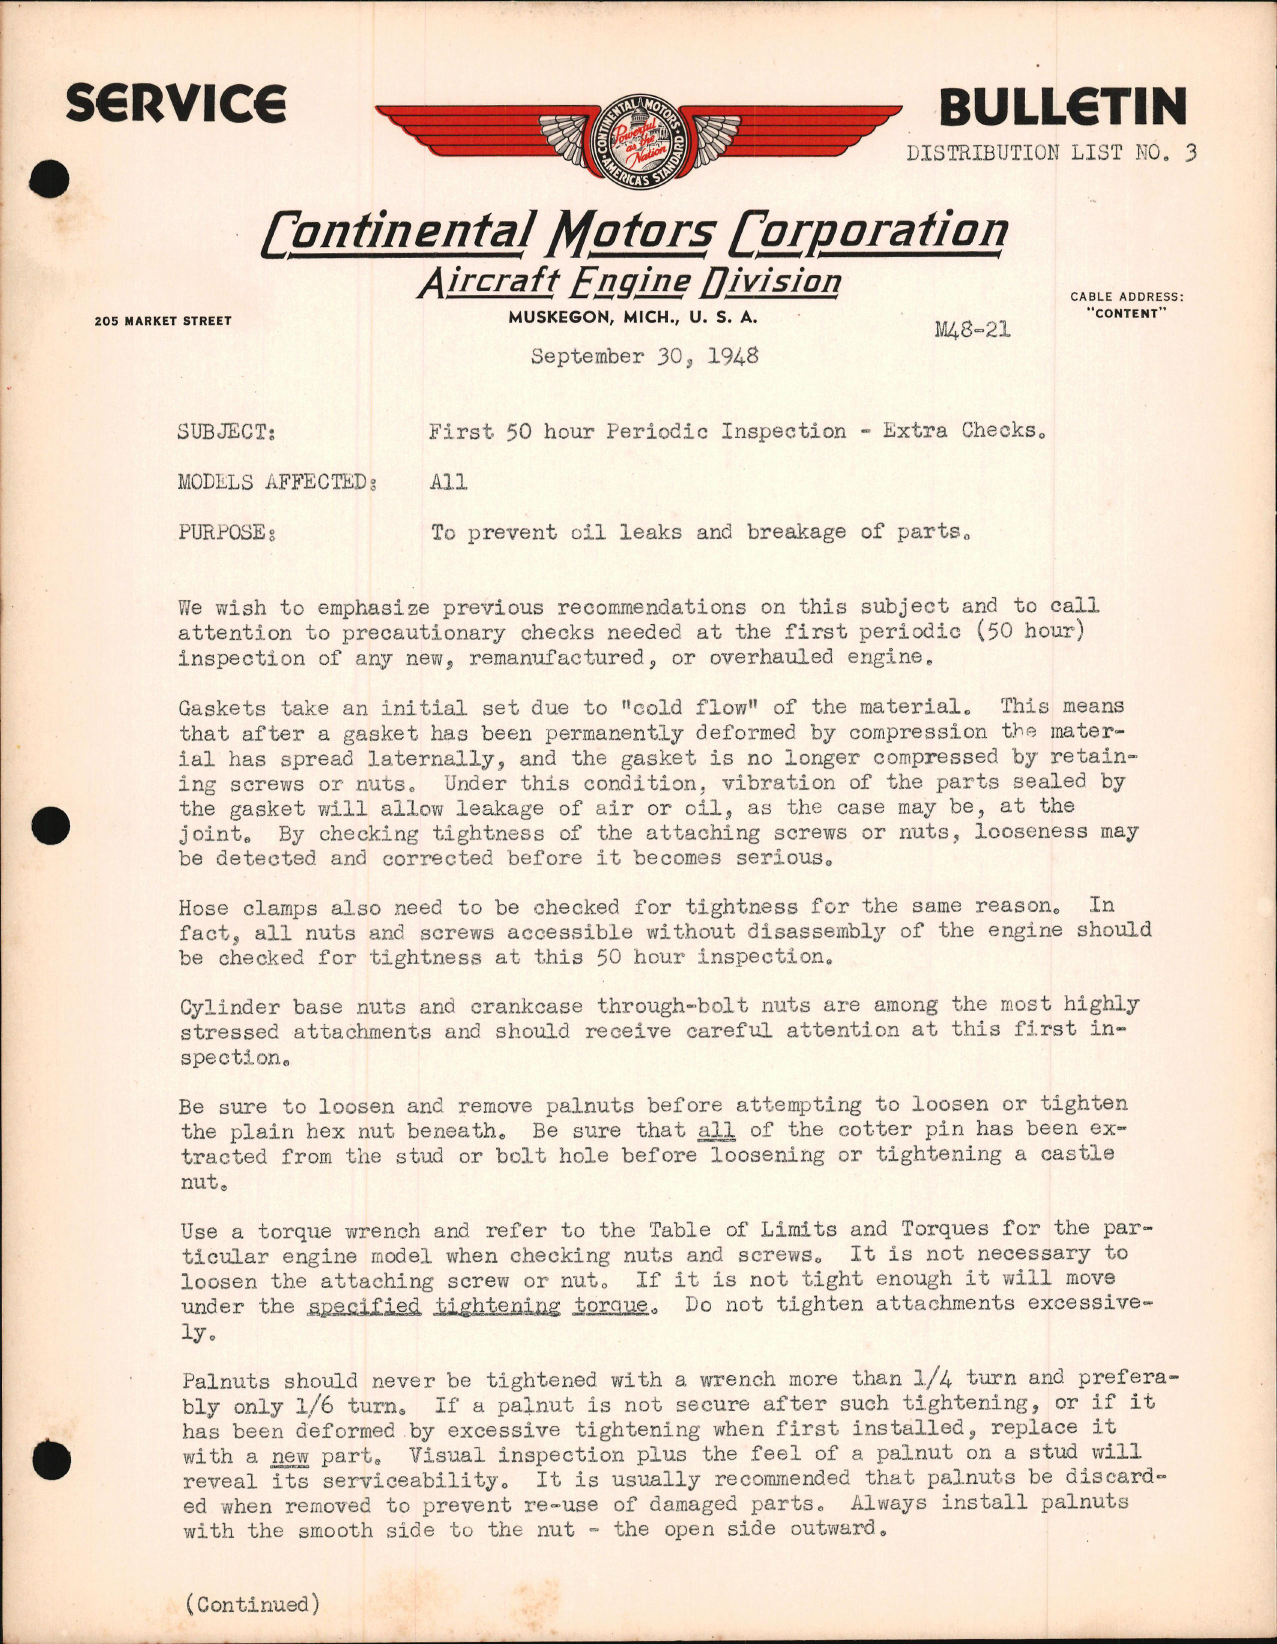 Sample page 1 from AirCorps Library document: First 50 Hour Periodic Inspection - Extra Checks